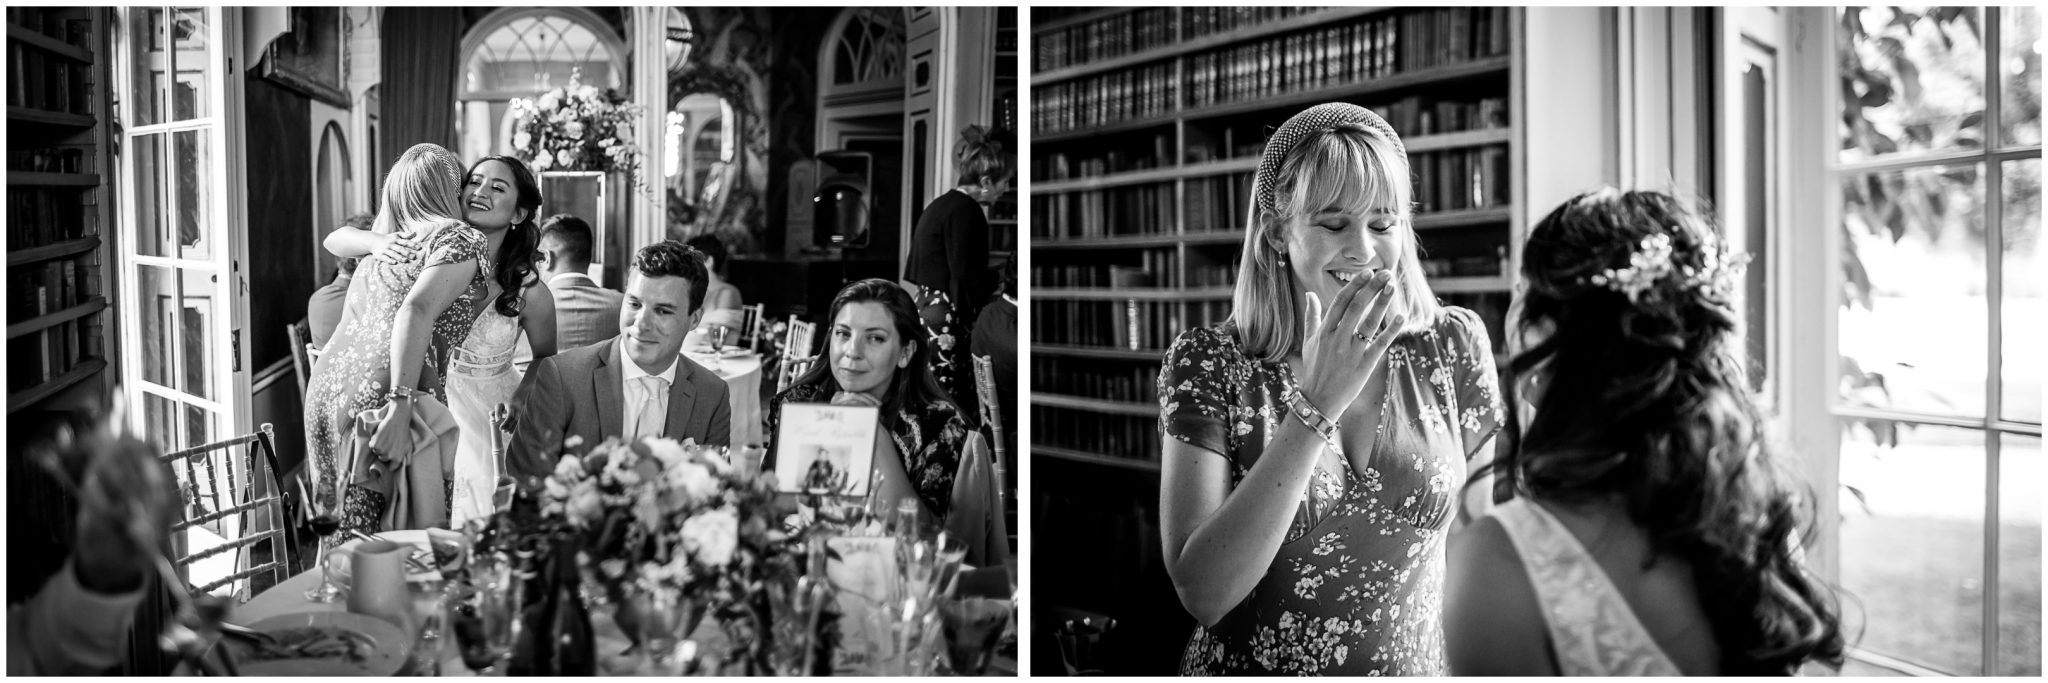 Black and white documentary photography in library of Avington Park wedding venue reception